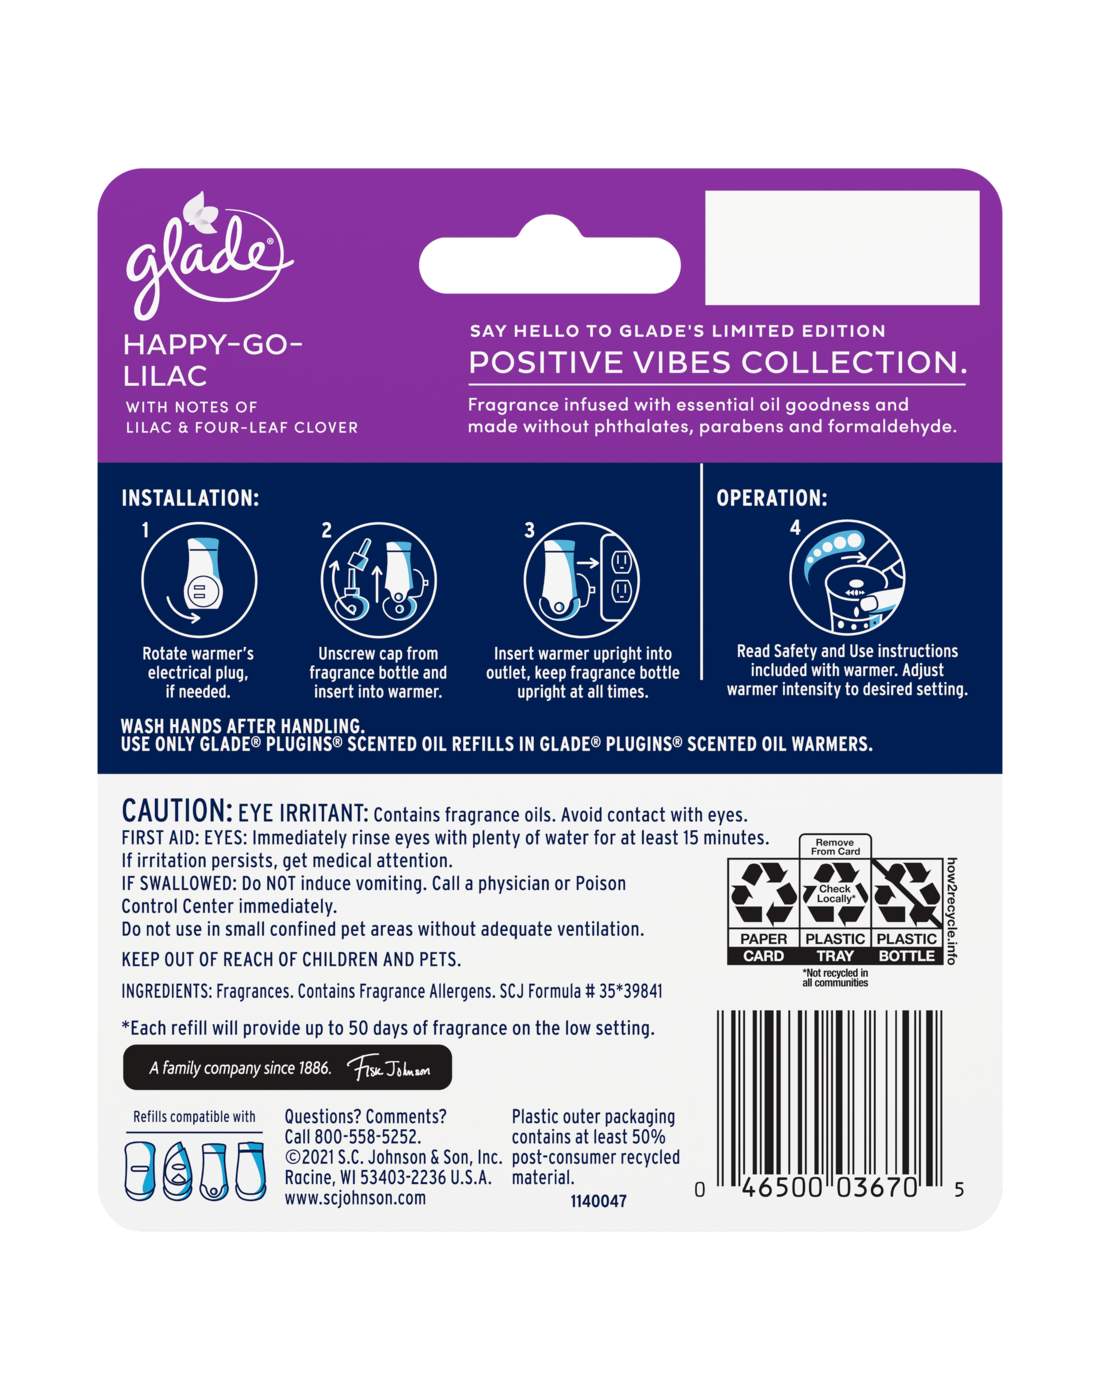 Glade PlugIns Scented Oil Air Freshener Refills - Happy Go Lilac; image 2 of 2